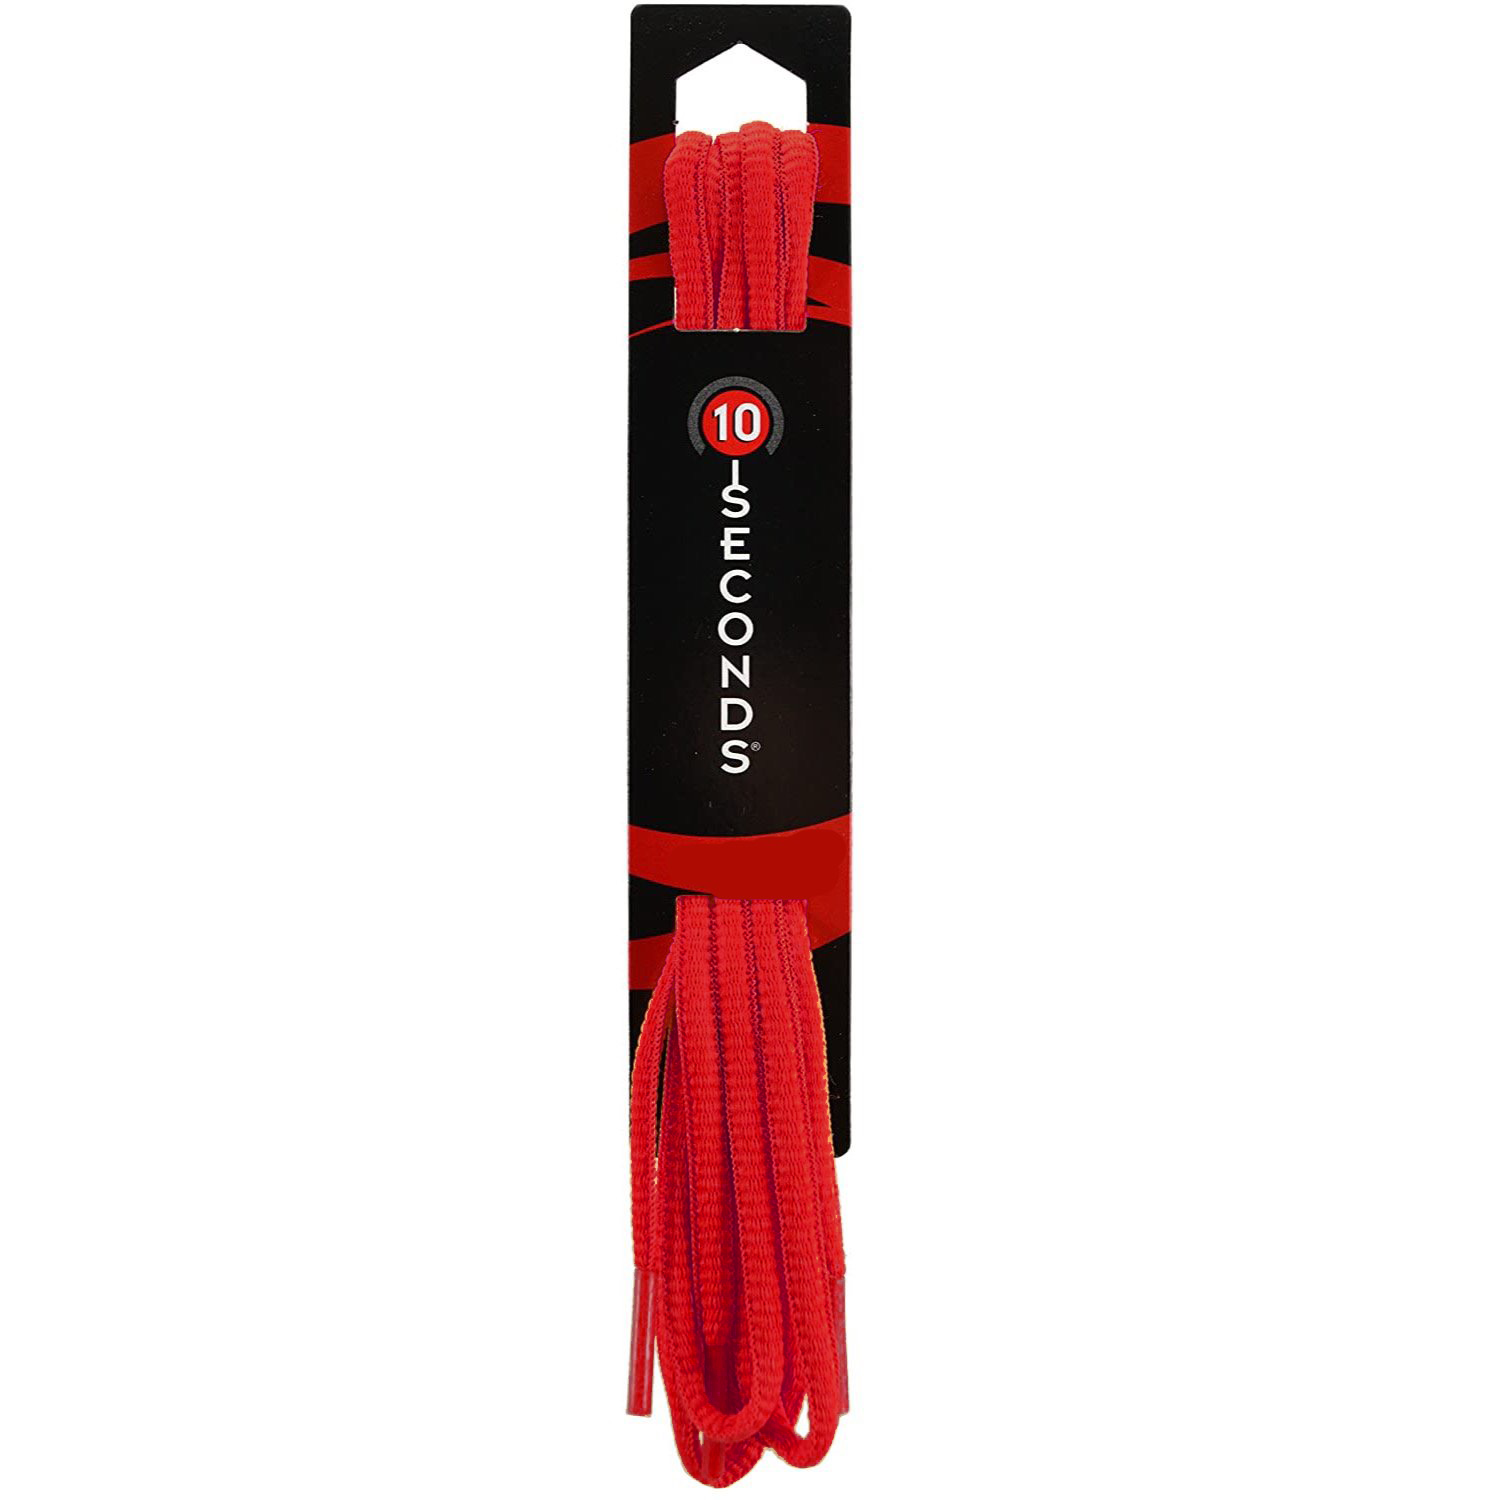 10 Seconds, Classics Oval Athletic Shoelace, Unisex, Red